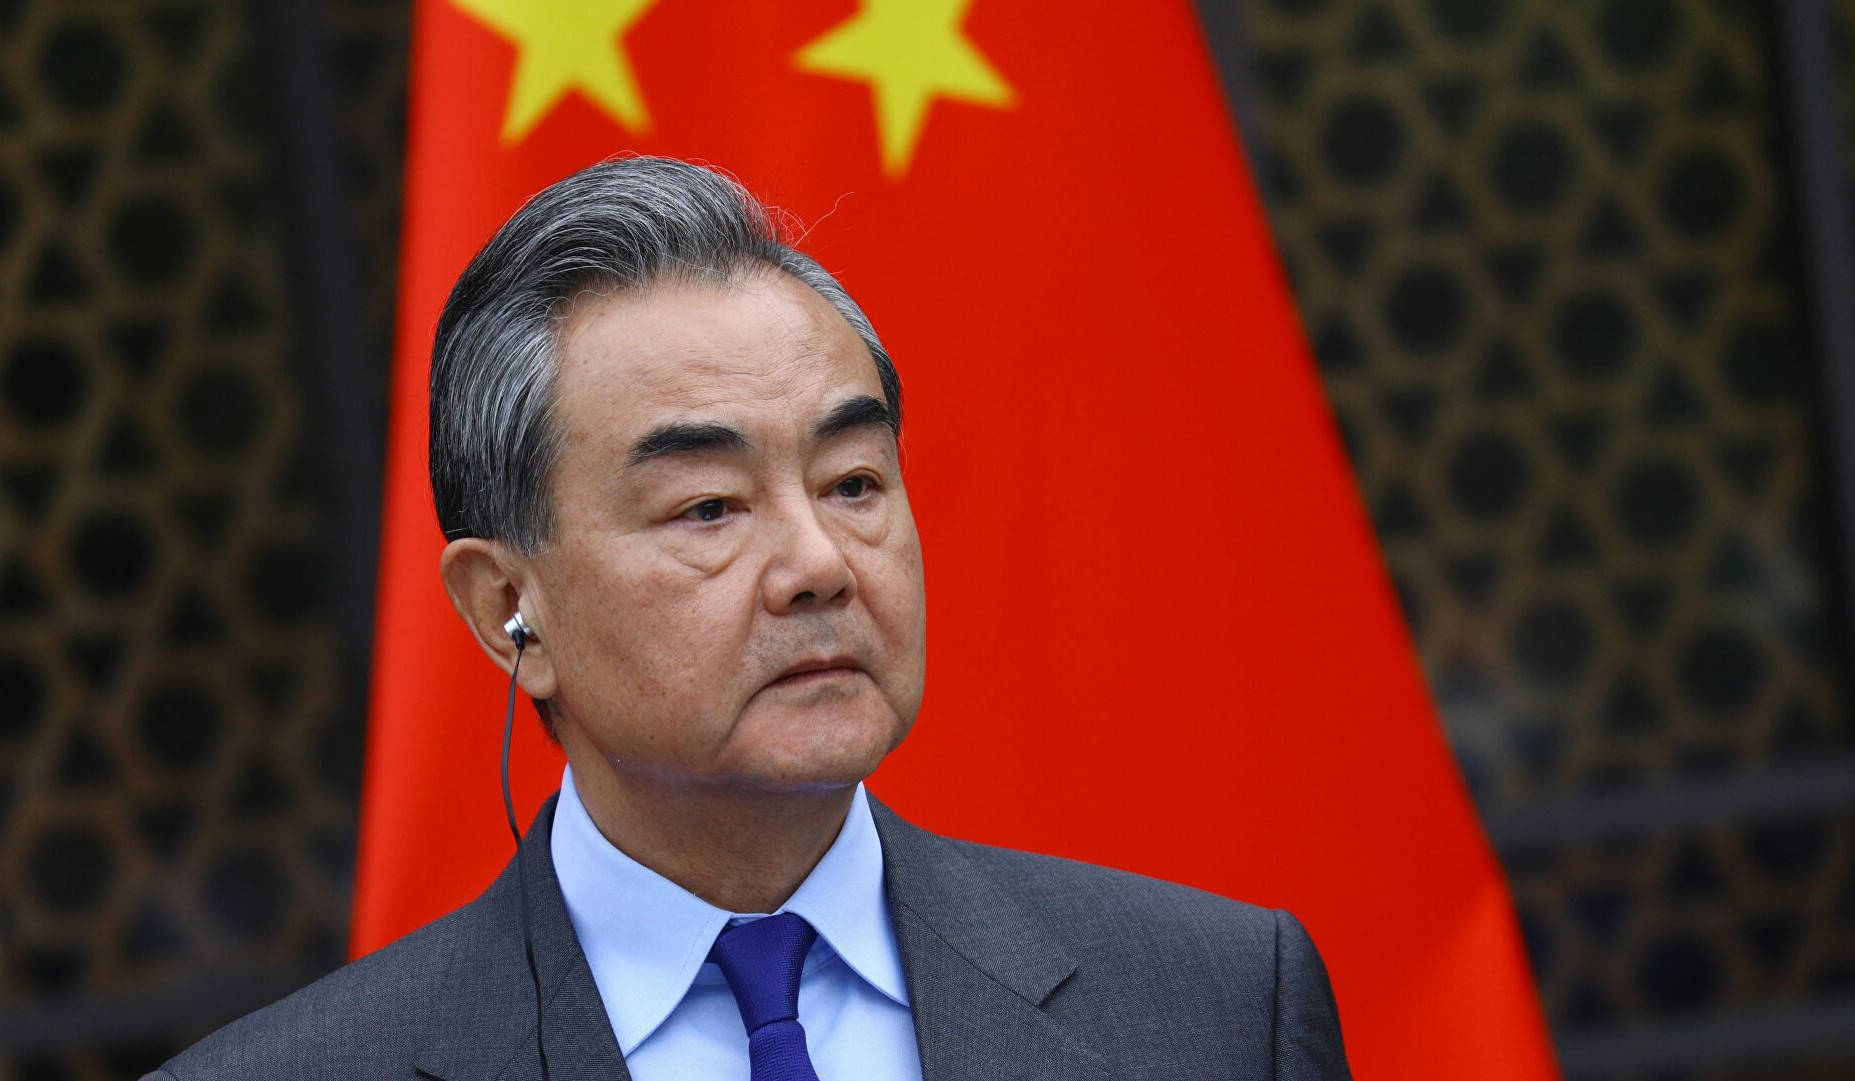 Beijing is ready to oppose Cold War mentality of West: Foreign Minister of China